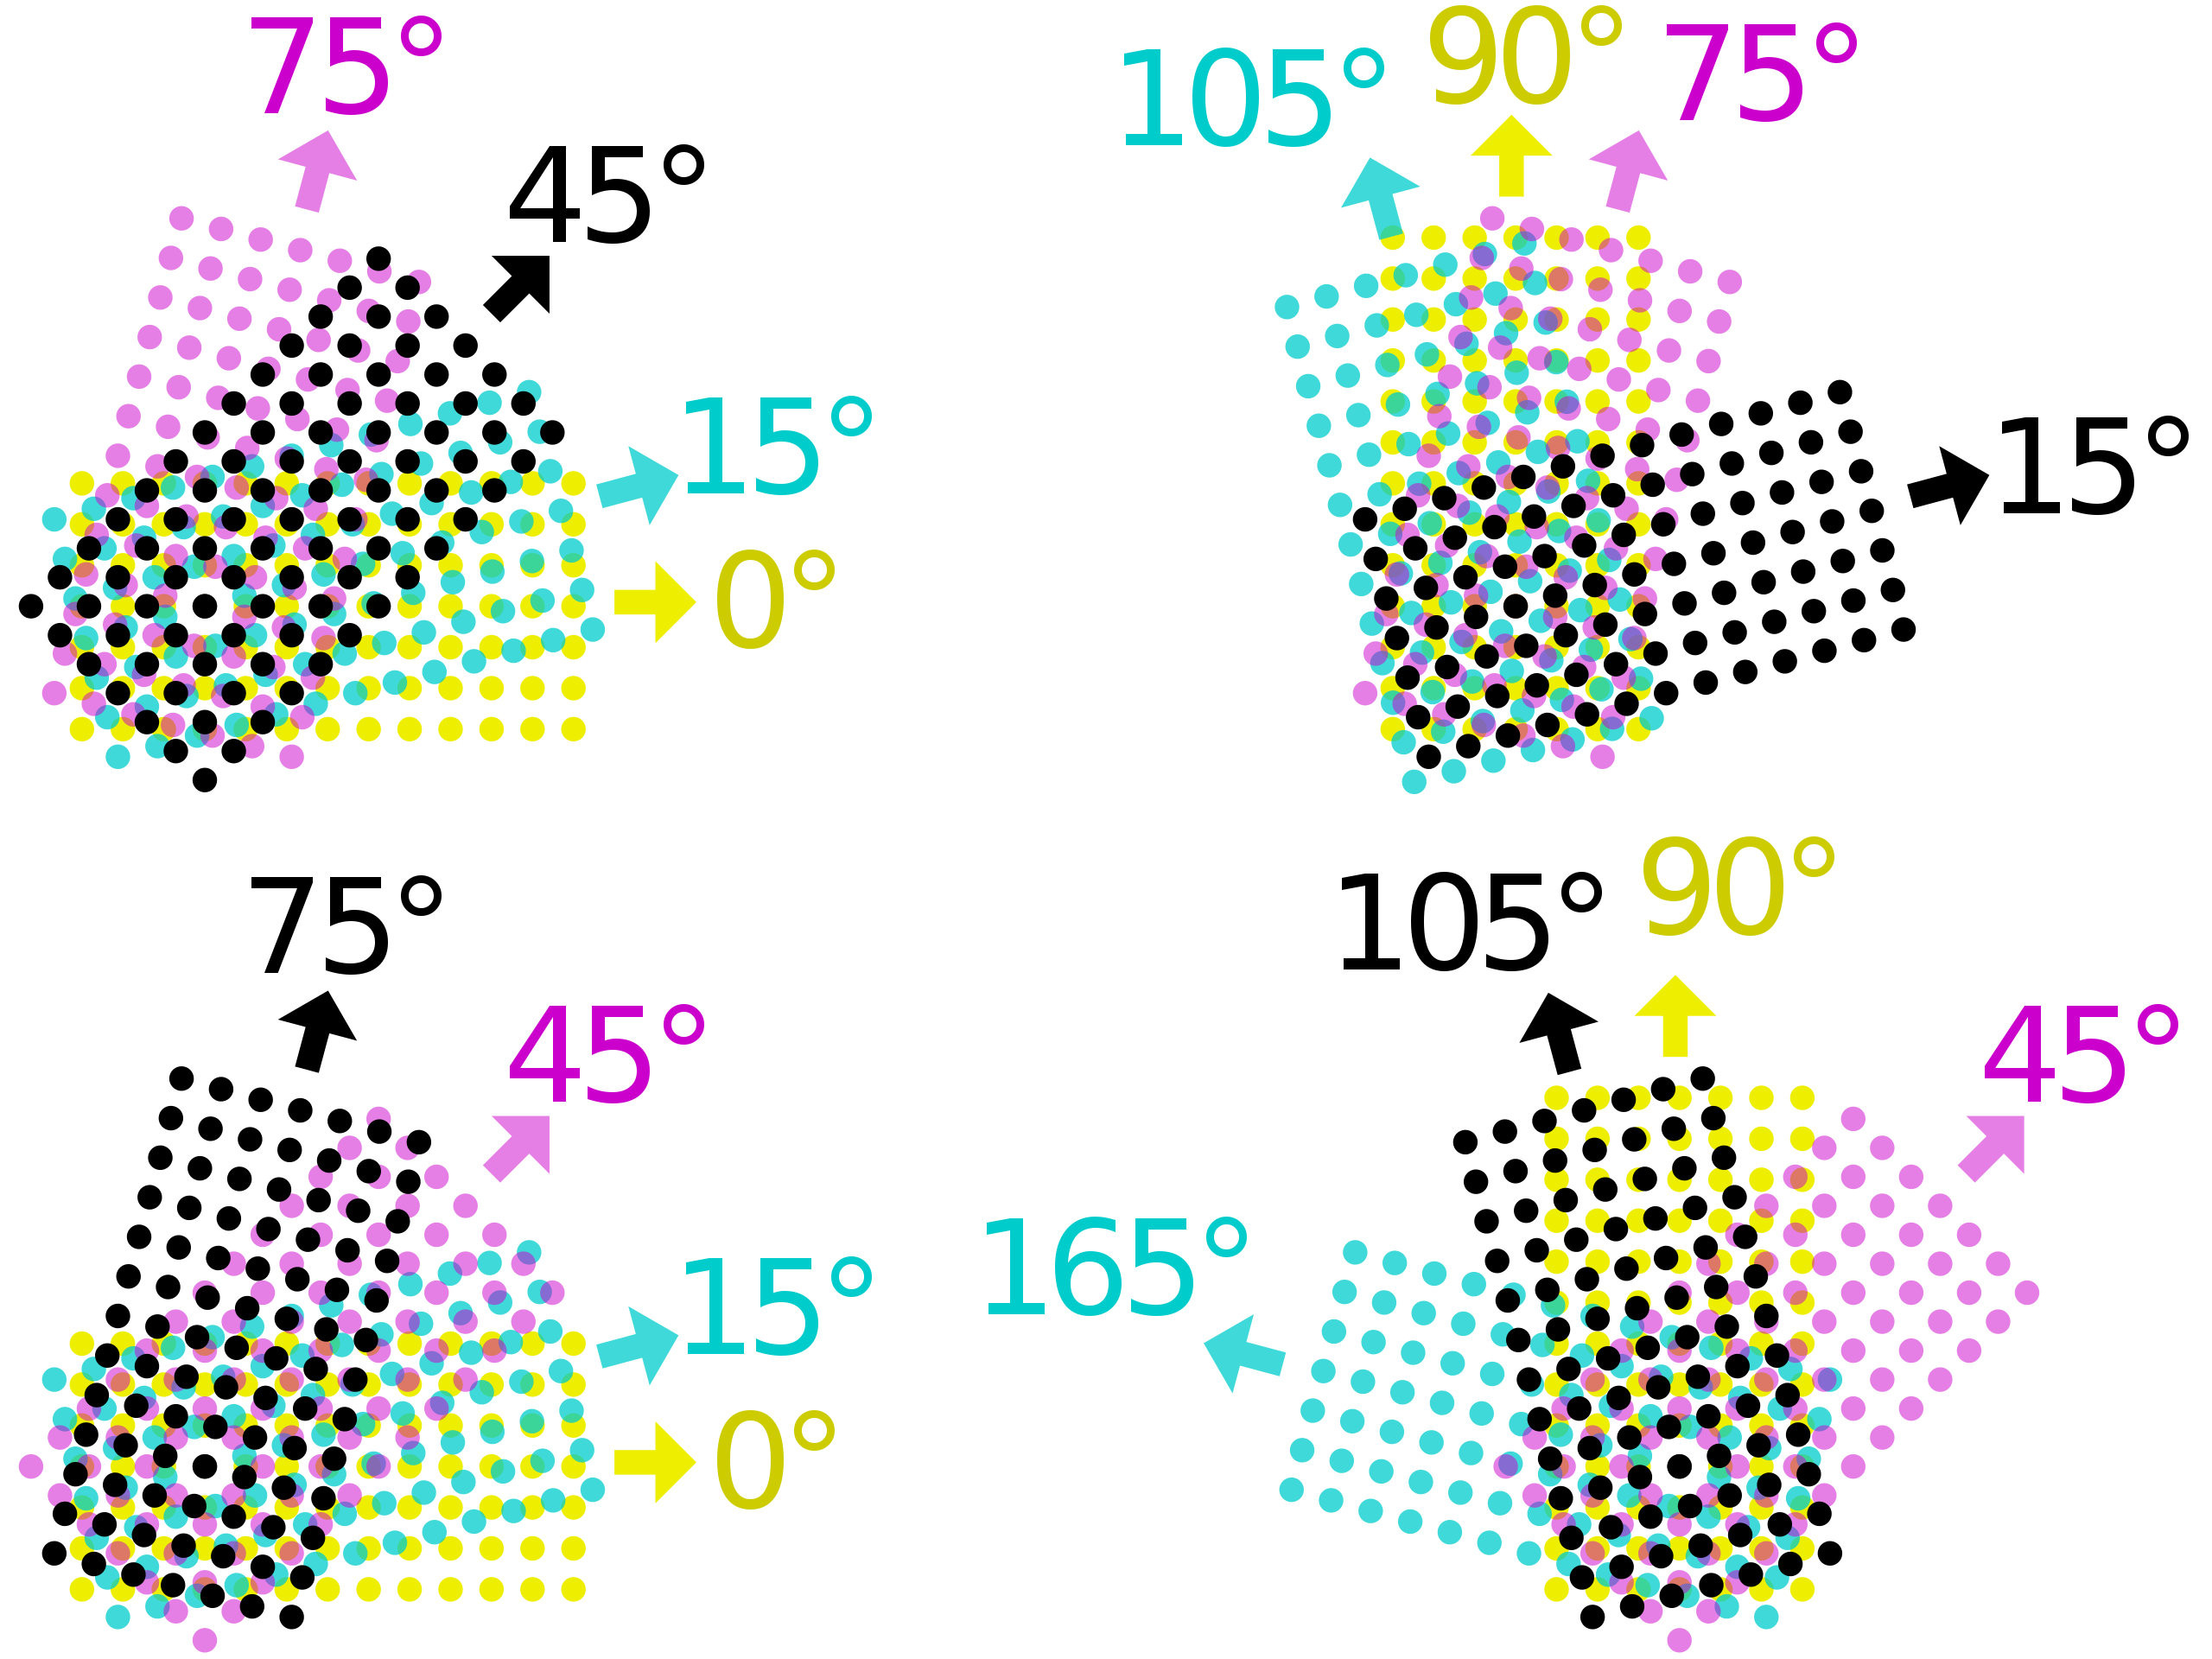 Examples of typical CMYK halftone screen angles (Source: Wikipedia)